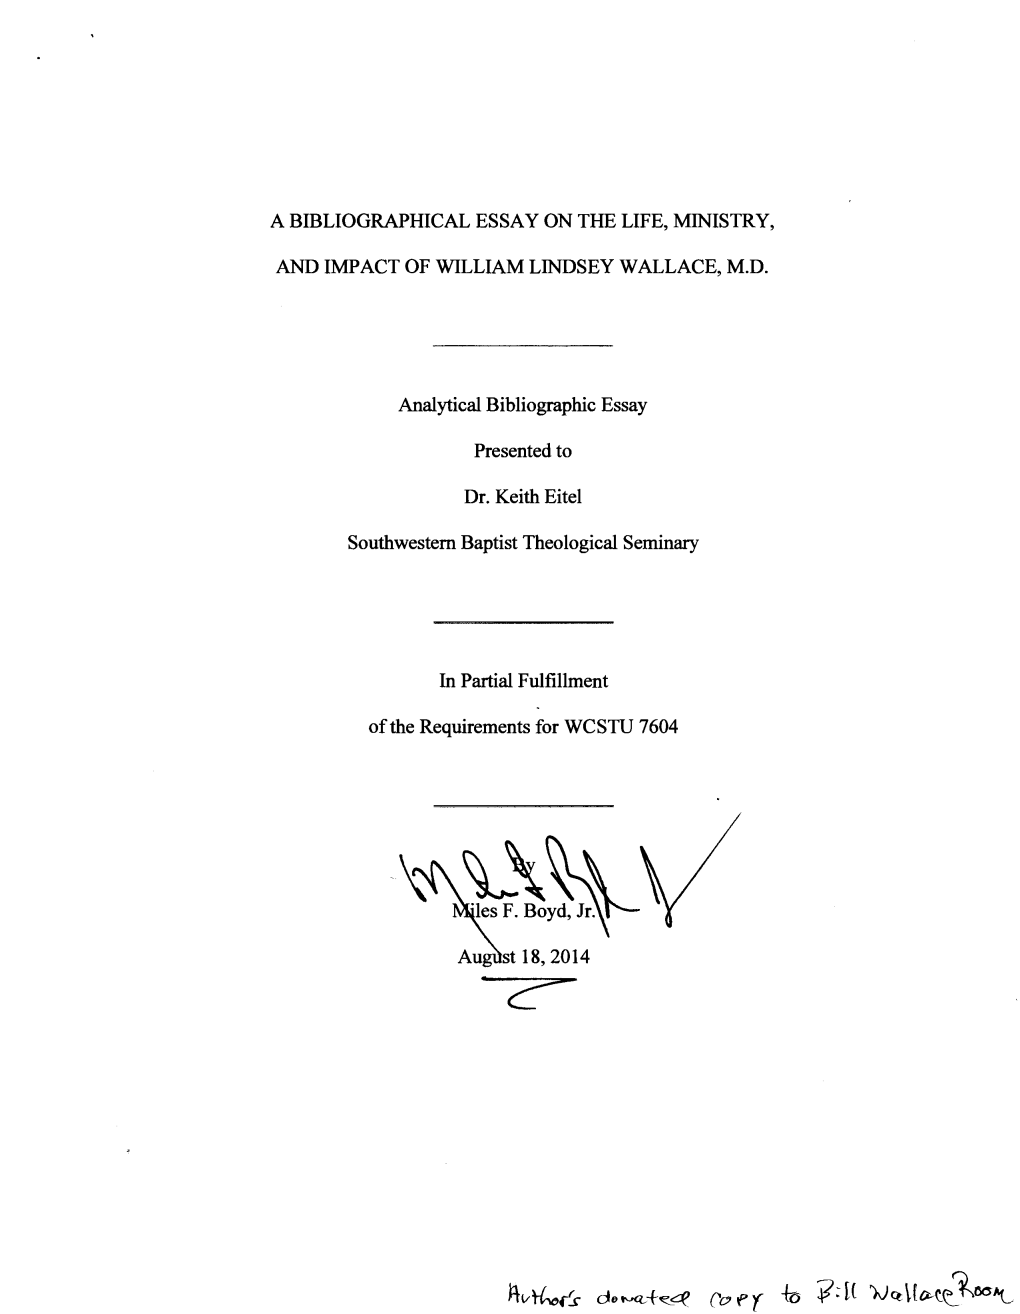 A Bffiliographical ESSAY on the LIFE, MINISTRY, and IMPACT of WILLIAM LINDSEY WALLACE, M.D